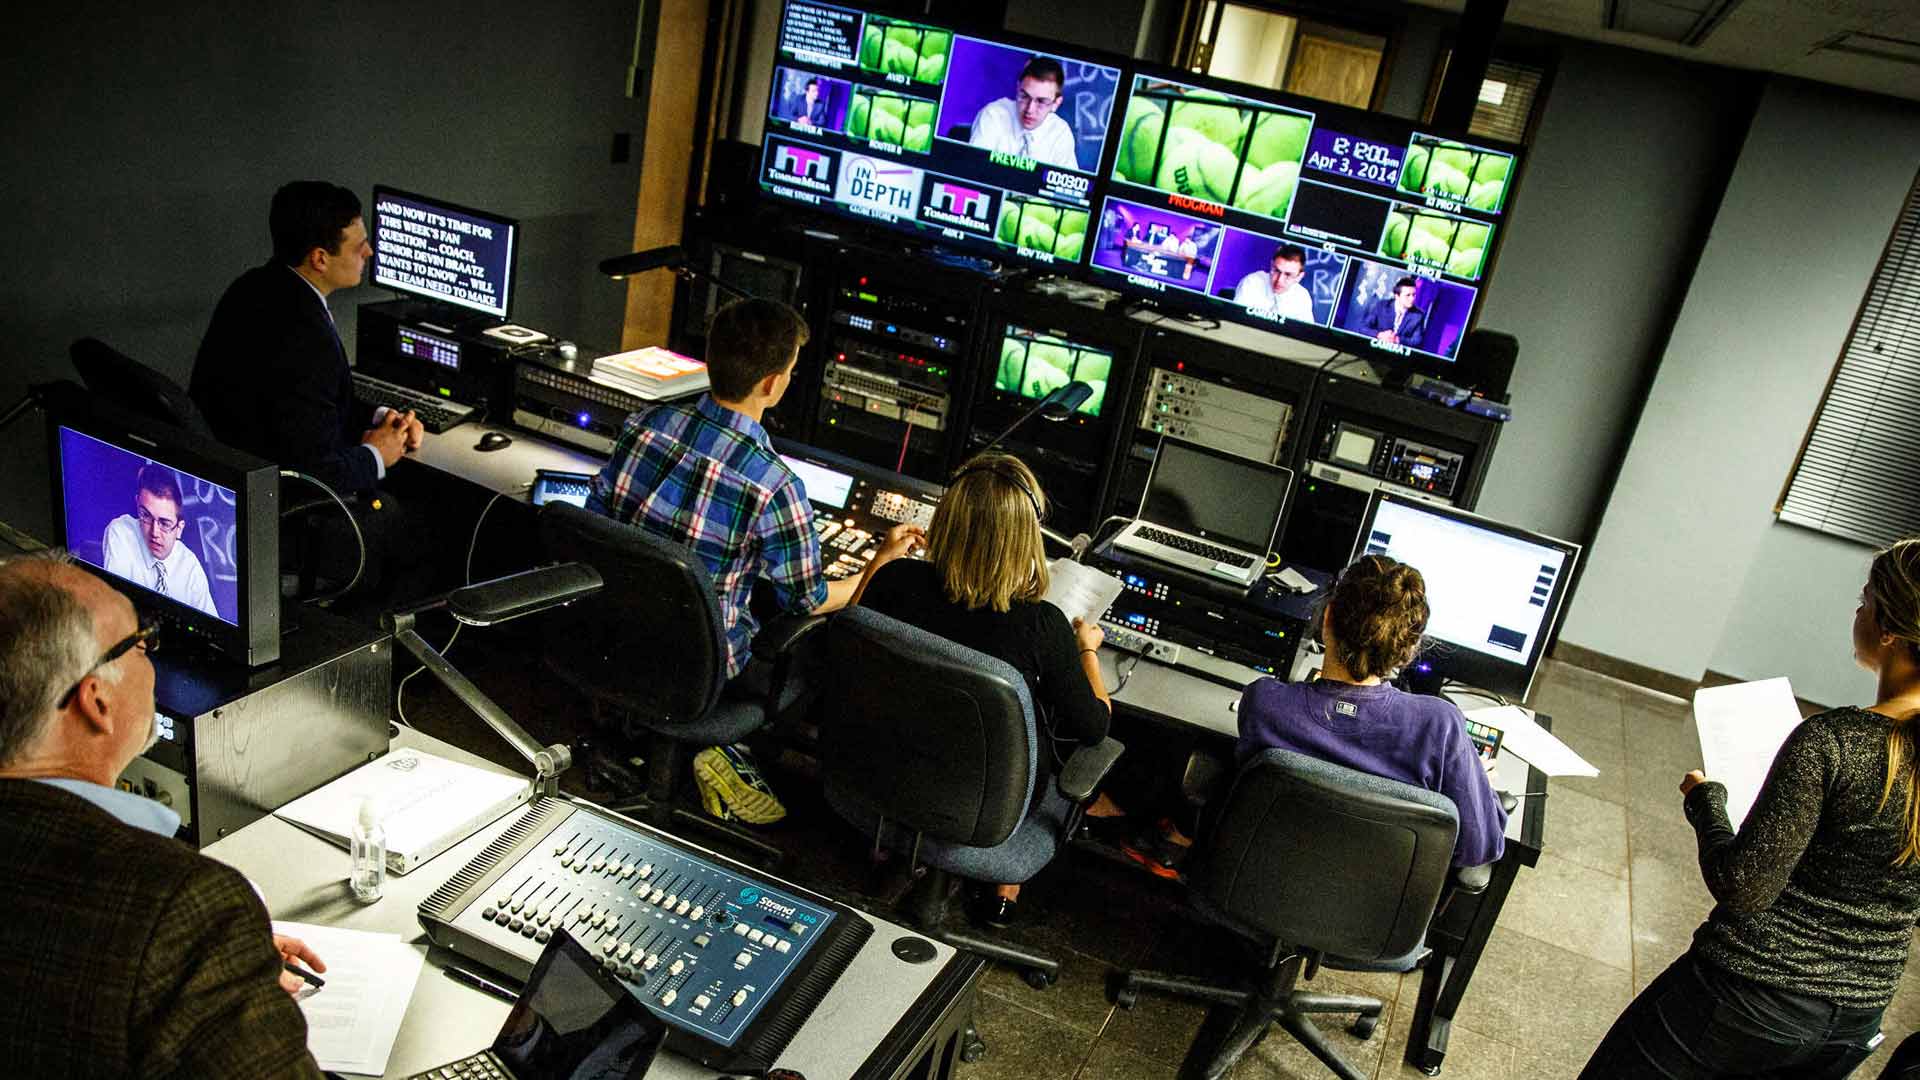 Students work in the control room during production of the TommieMedia program "The Locker Room" in the TV studio in O'Shaughnessy Educational Center.